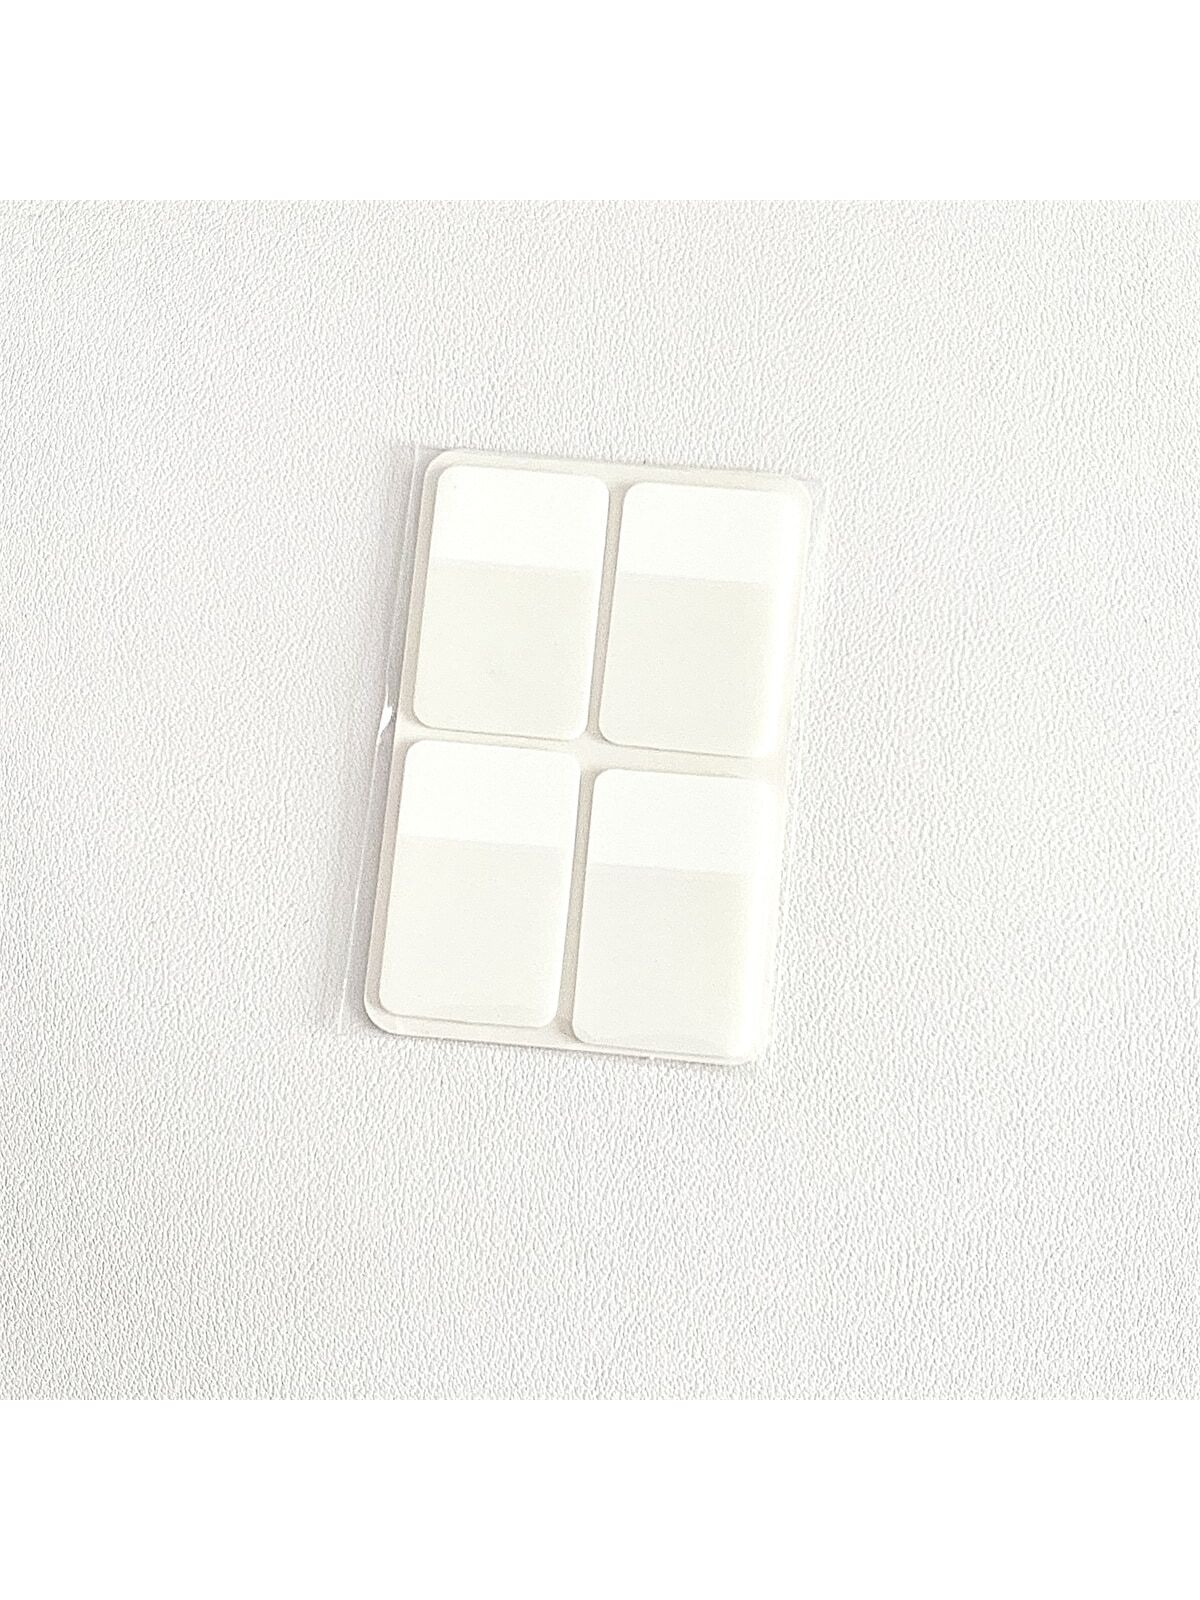 White Color 0.5/1 Inch Index Cards For Photos Packaging Material, High Viscosity And Quick Drying Double Sided Sticky Note